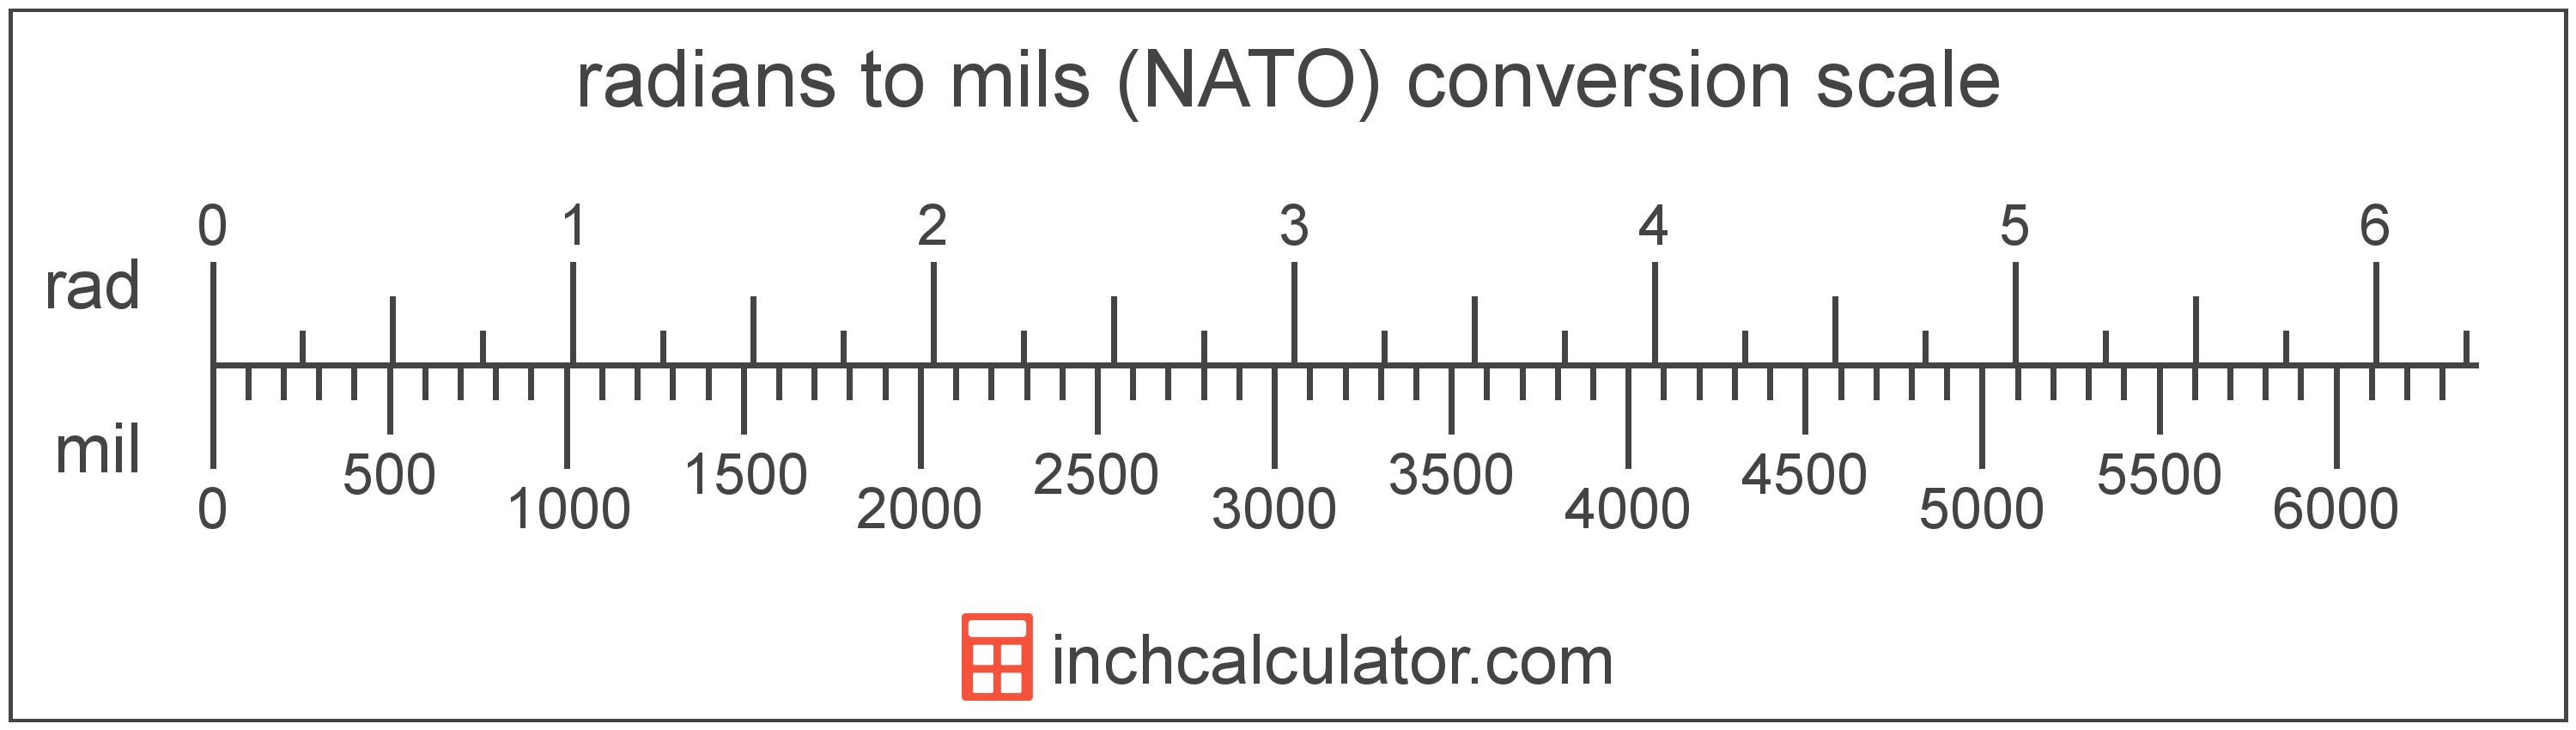 conversion scale showing mils (NATO) and equivalent radians angle values